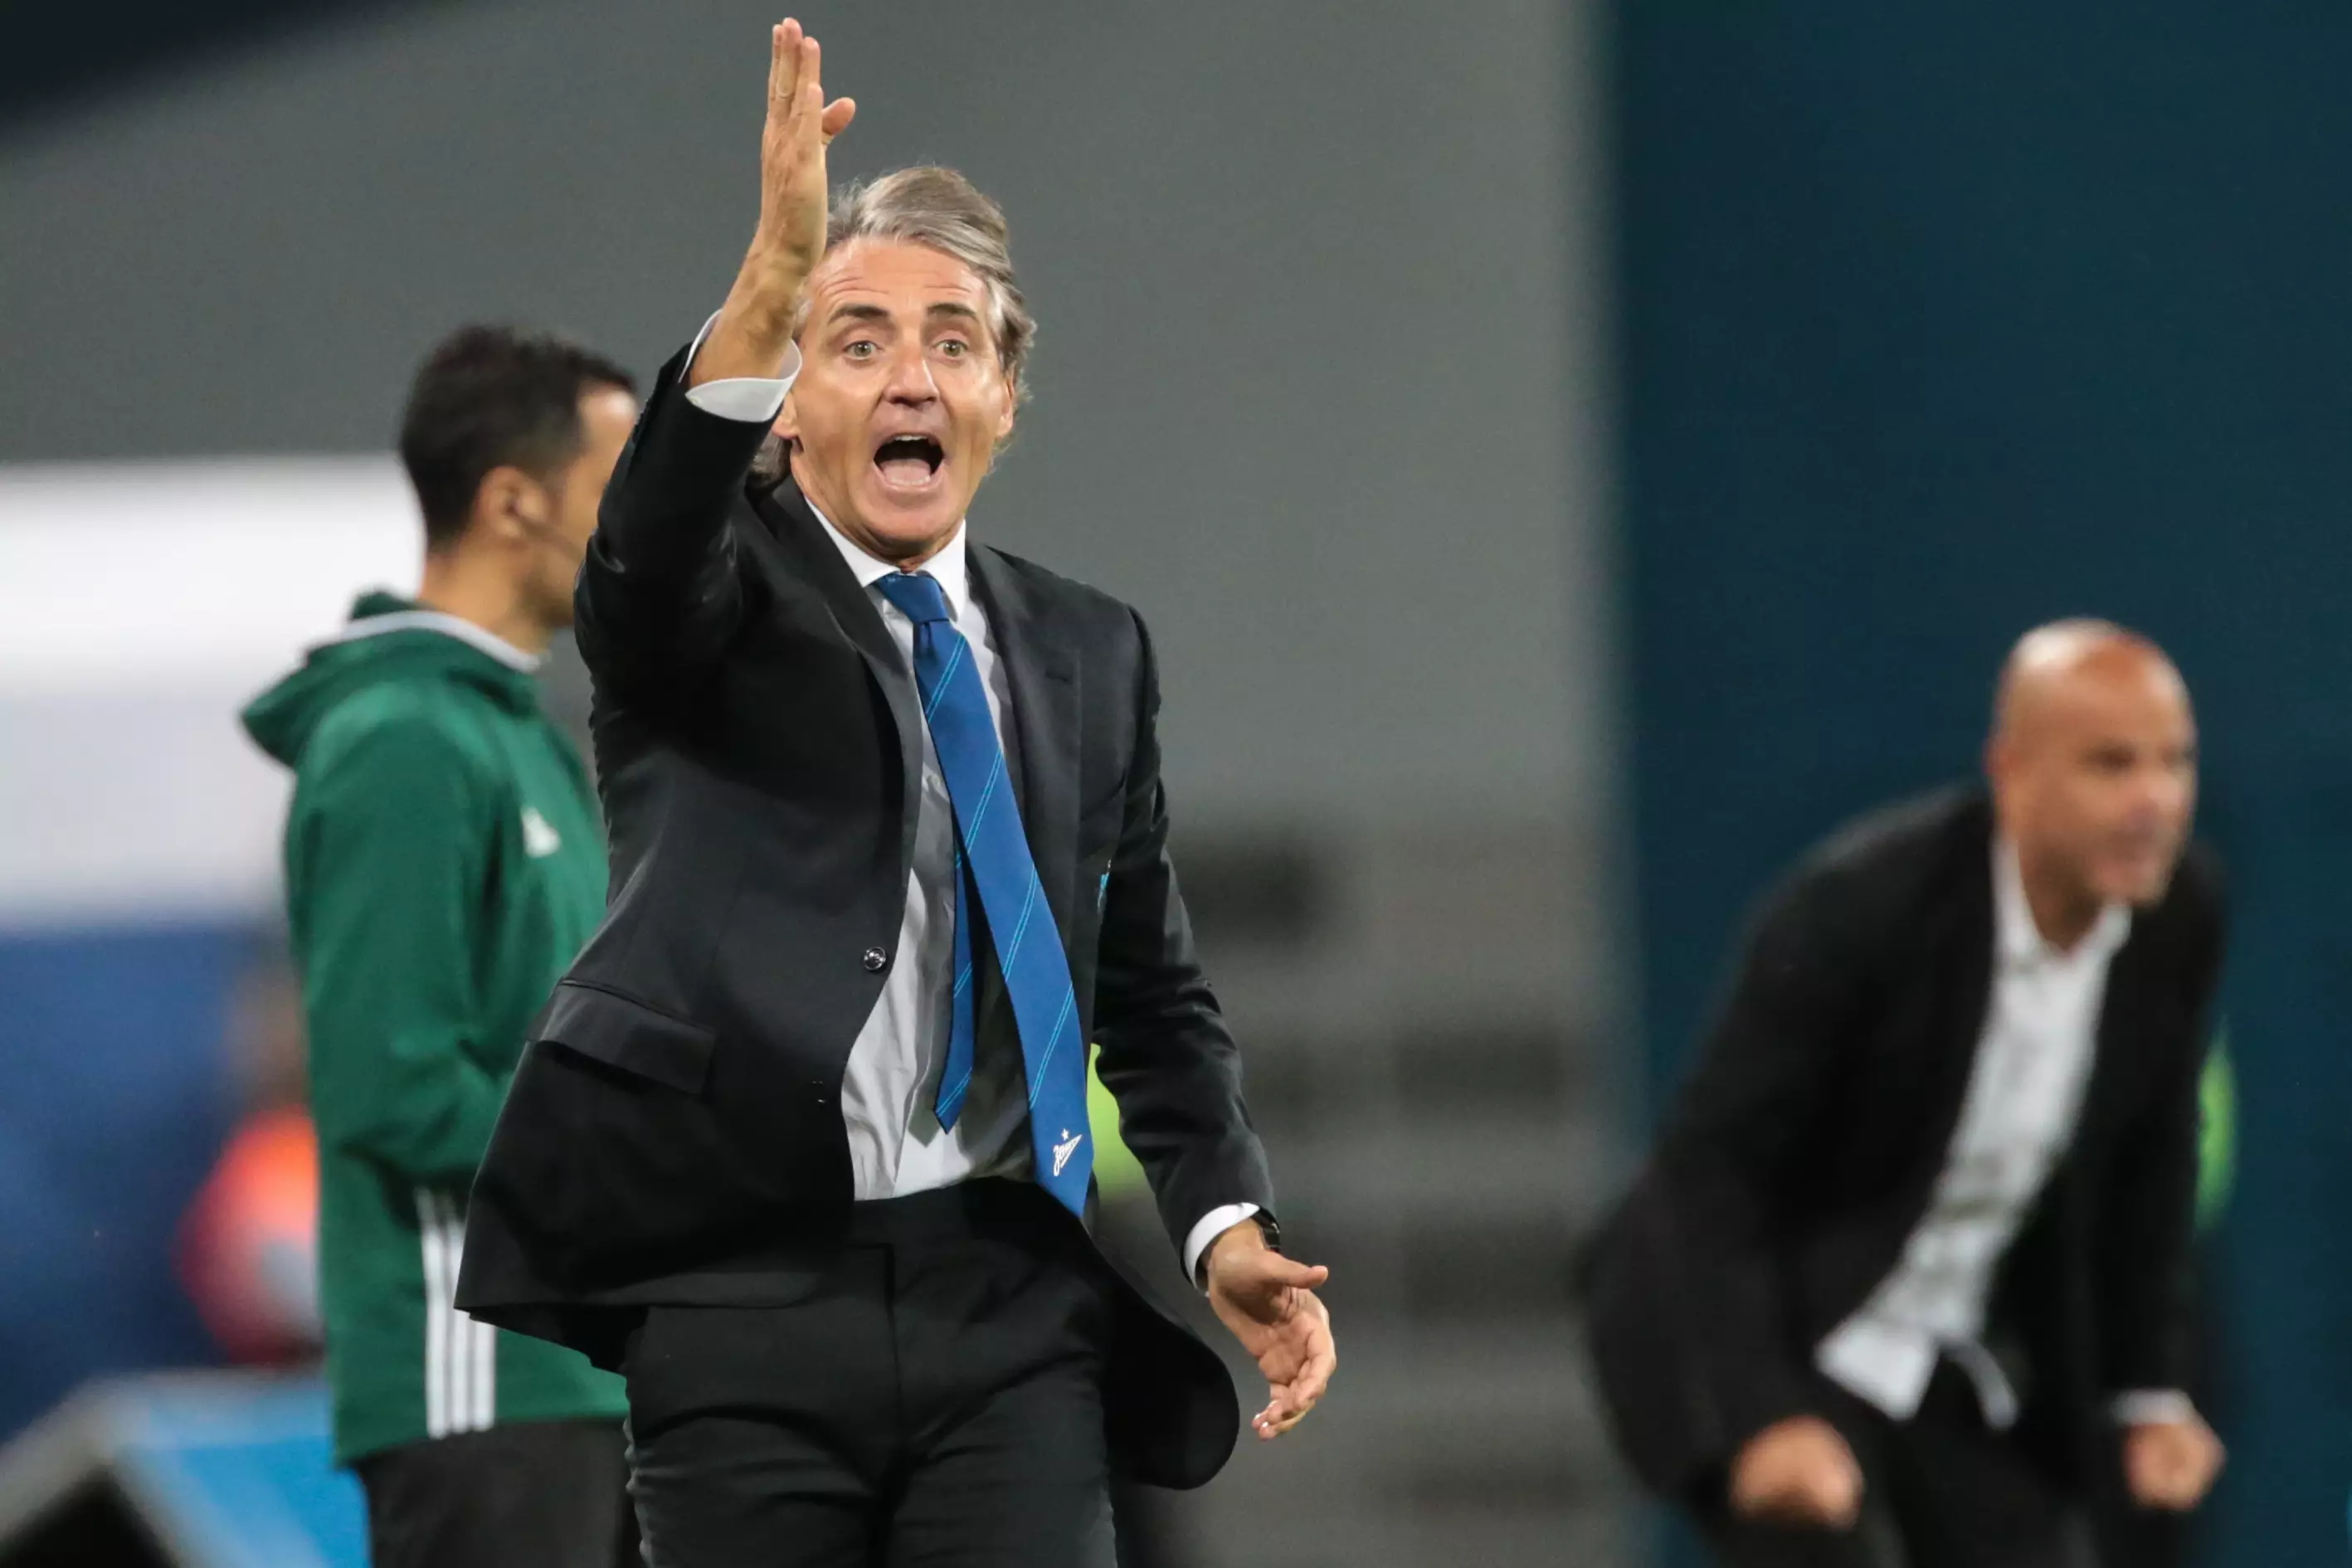 Mancini gestures on the touchline as Zenit manager. Image: PA